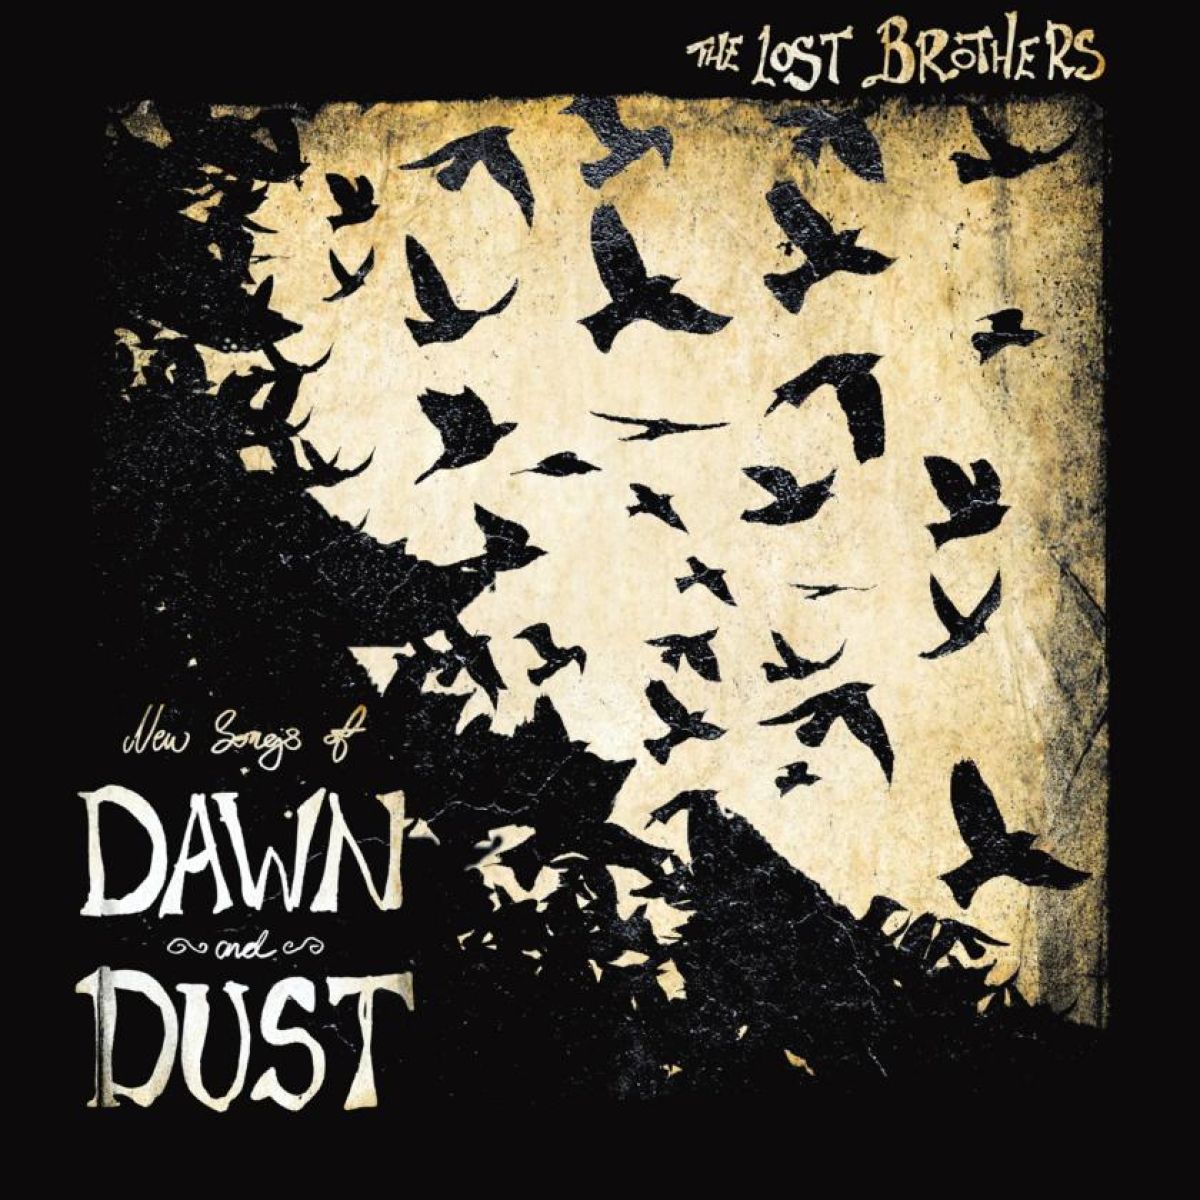 THE LOST BROTHERS - New Songs Of Dawn And Dust - LP - Vinyl